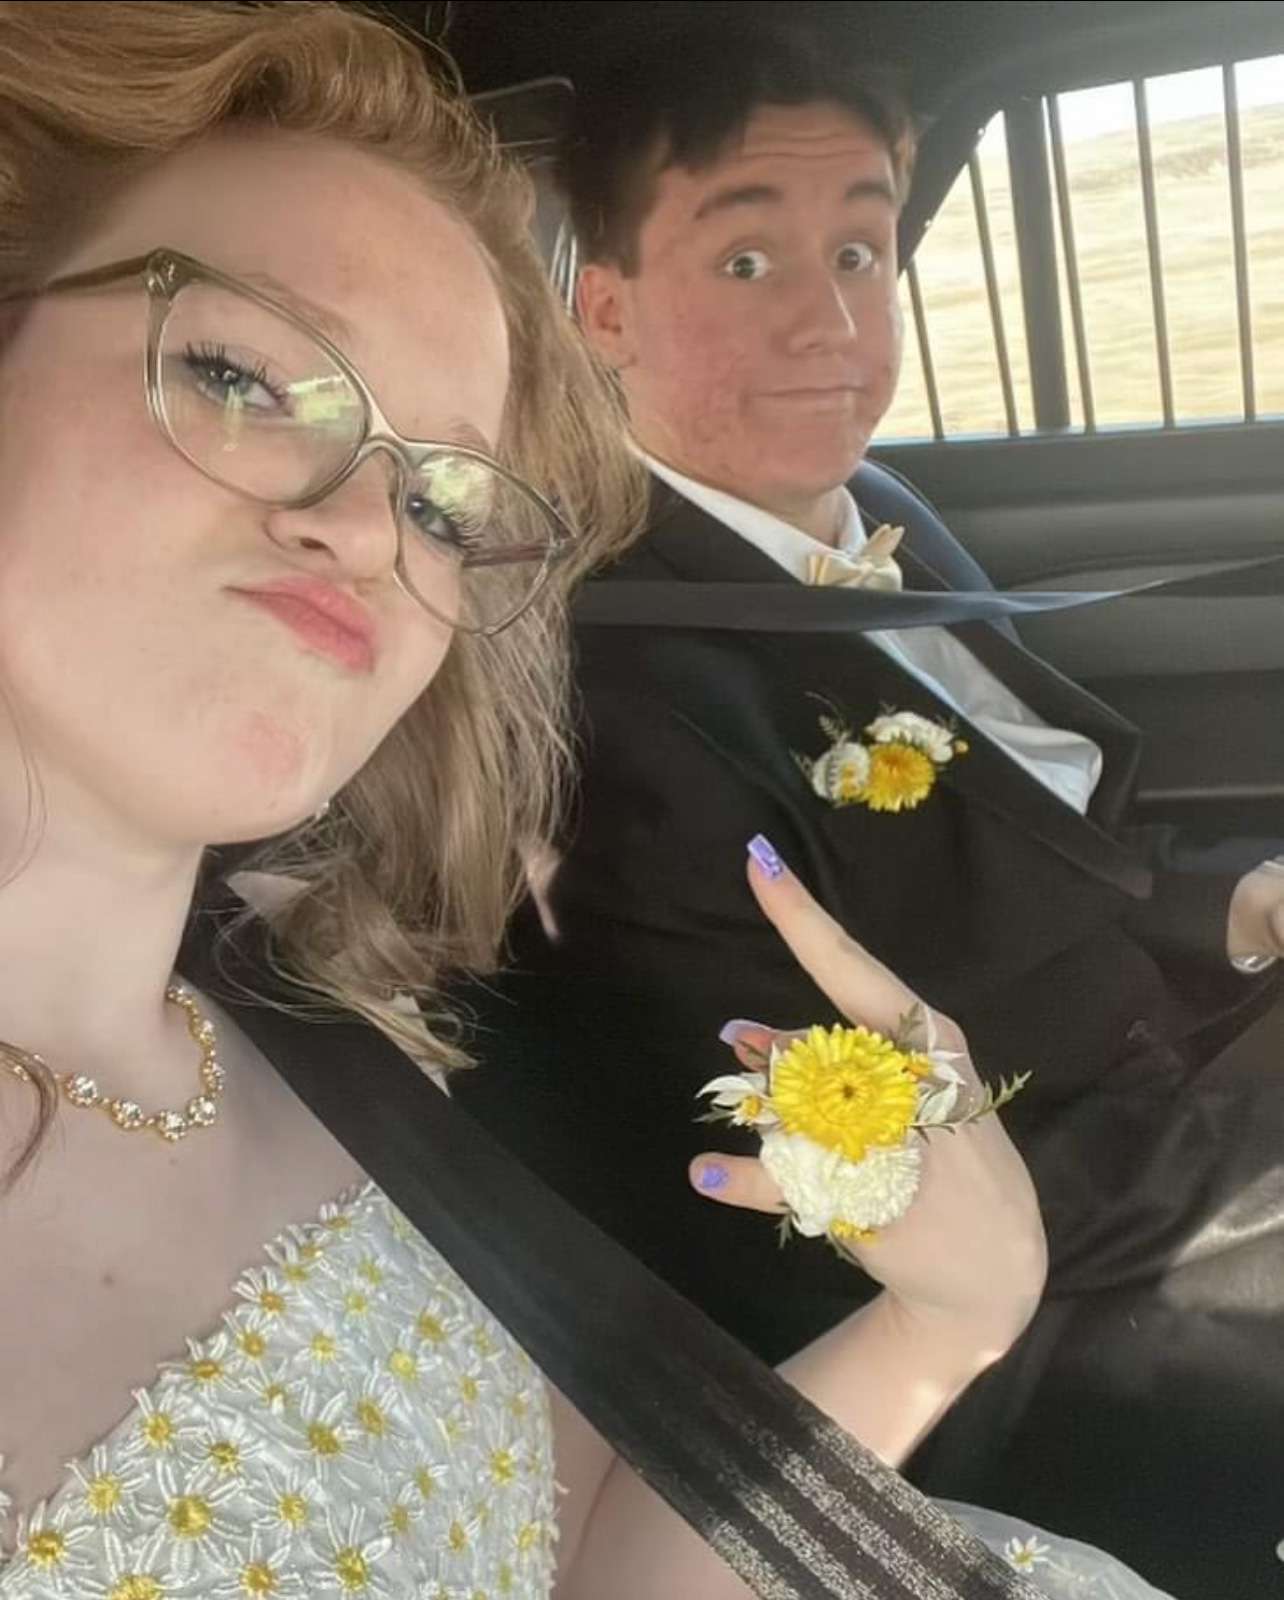 2 Teens Were Stranded on Their Way to Prom Until an Officer Stepped in: 'Amazing to Be Able to Help'